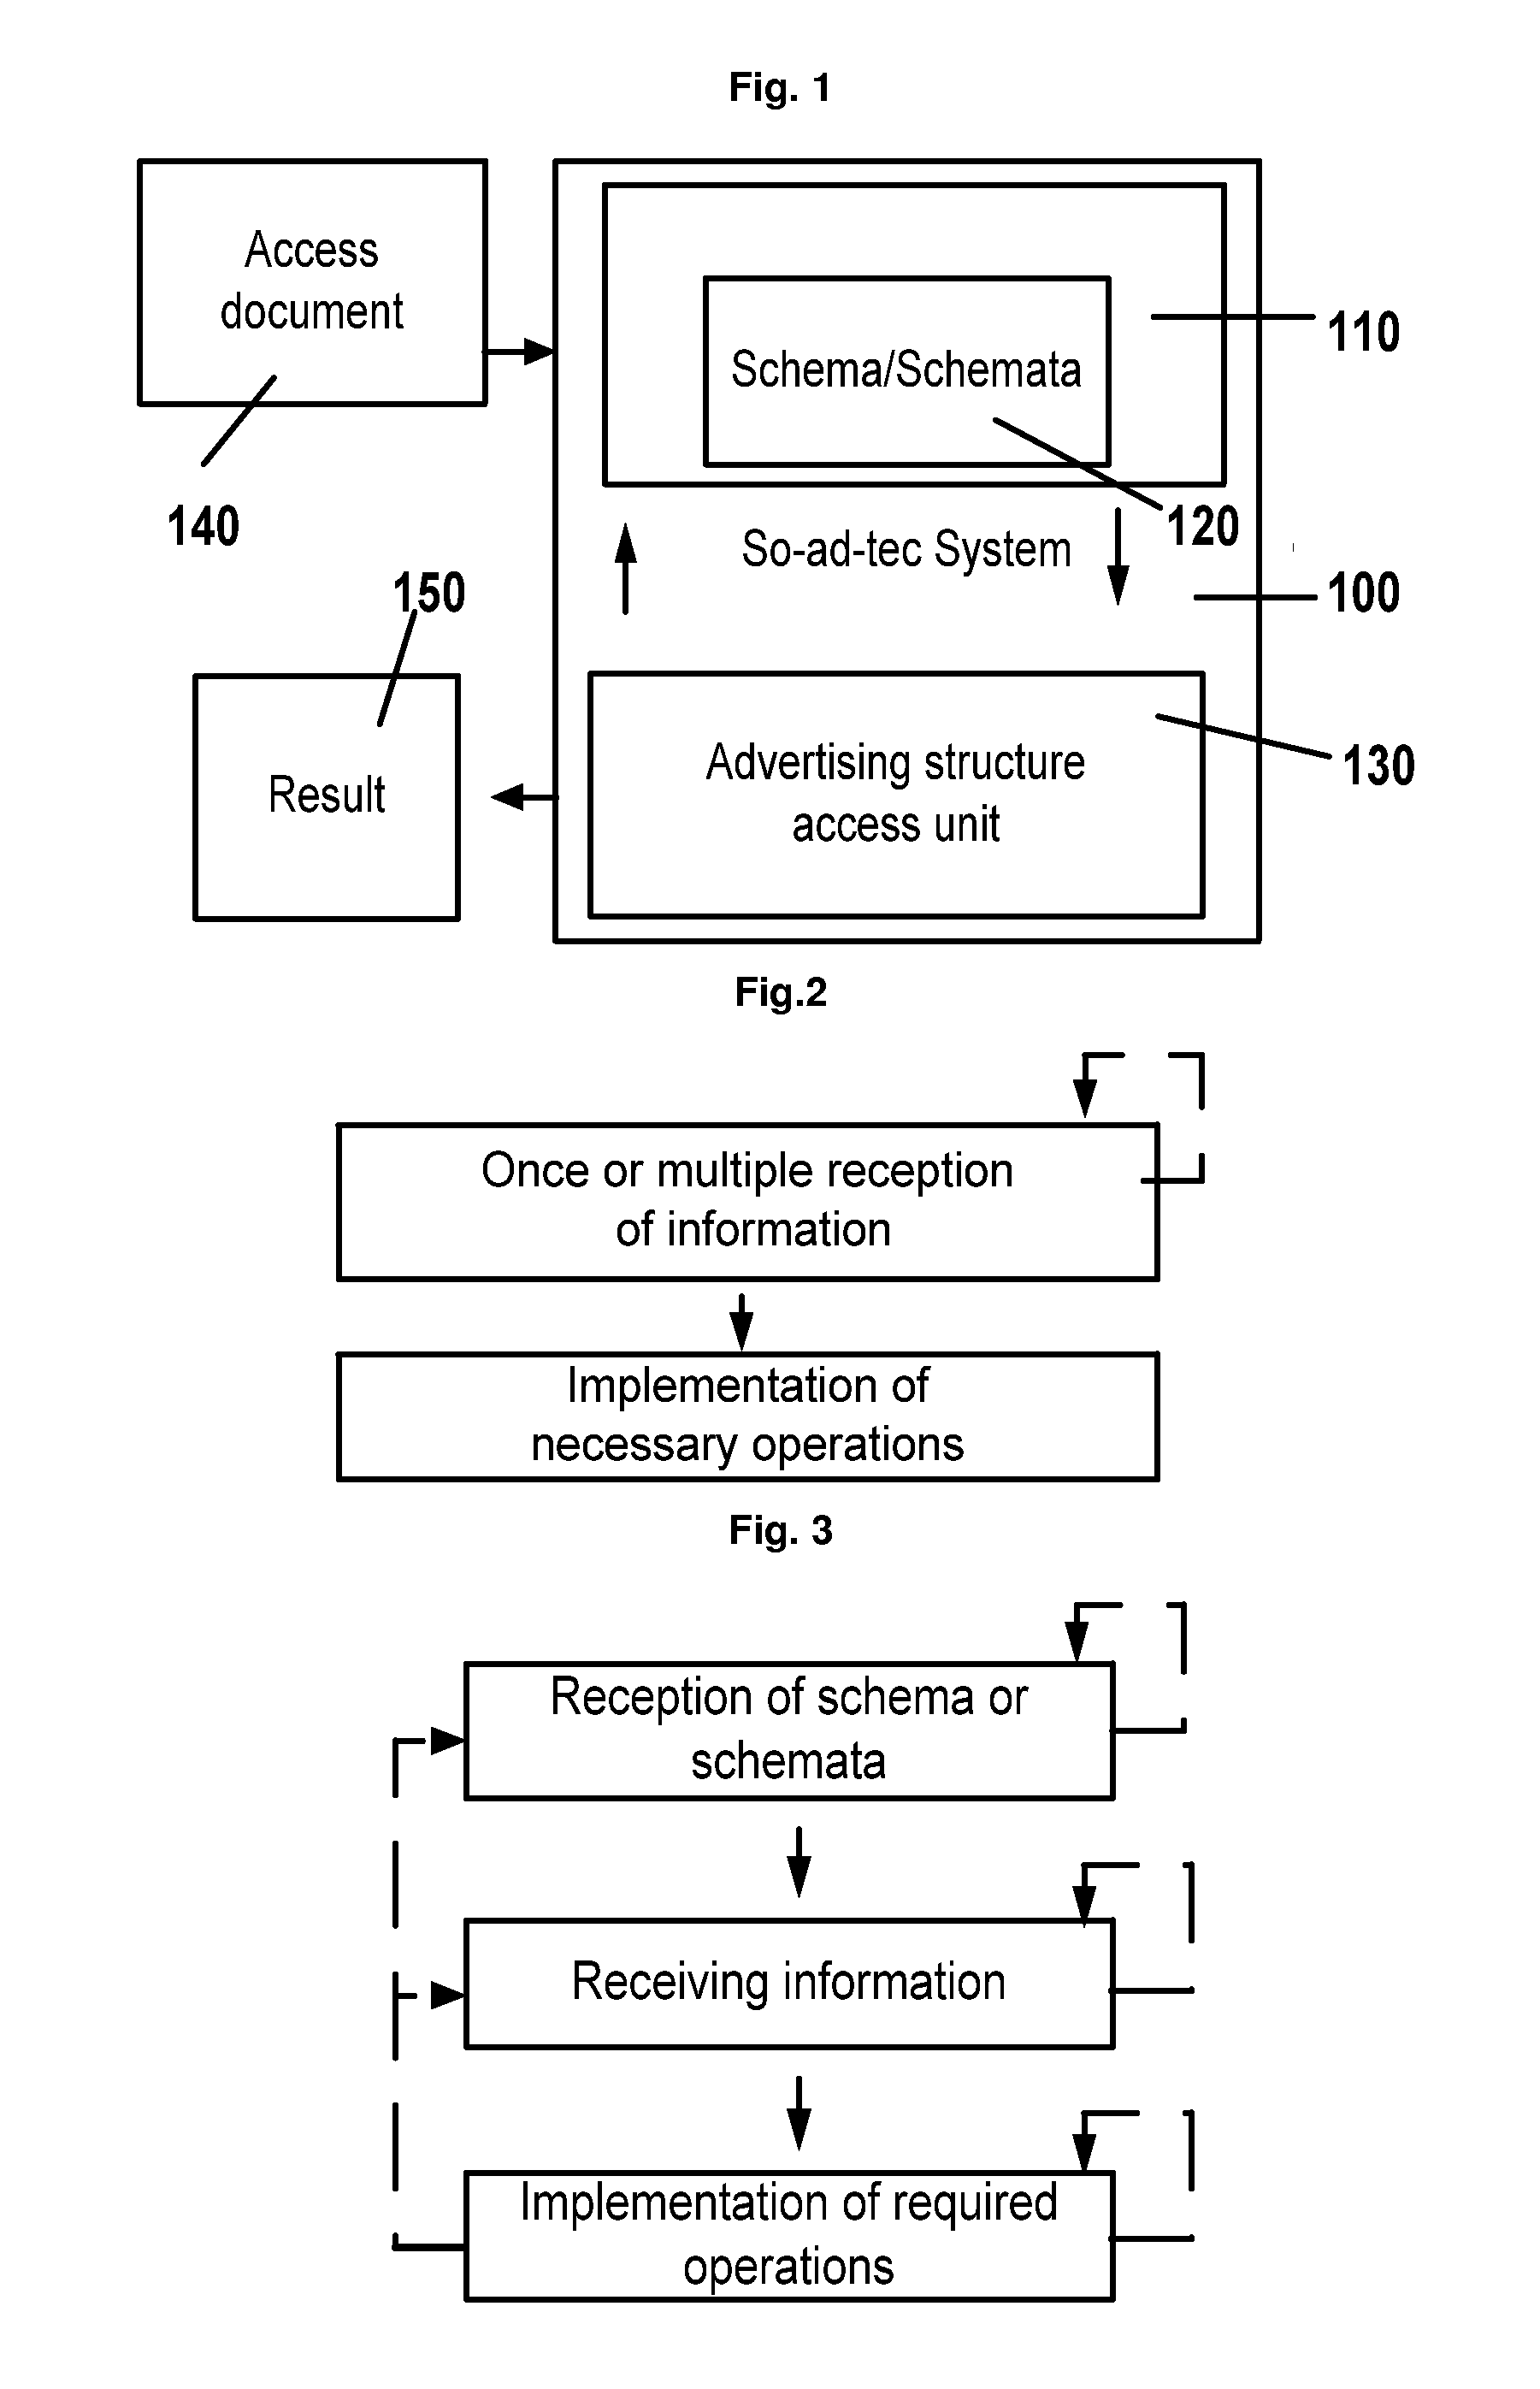 Social advertising technology (so-ad-tec) system and method for advertising for and in documents, and other systems and methods for accessing, structuring, and evaluating documents